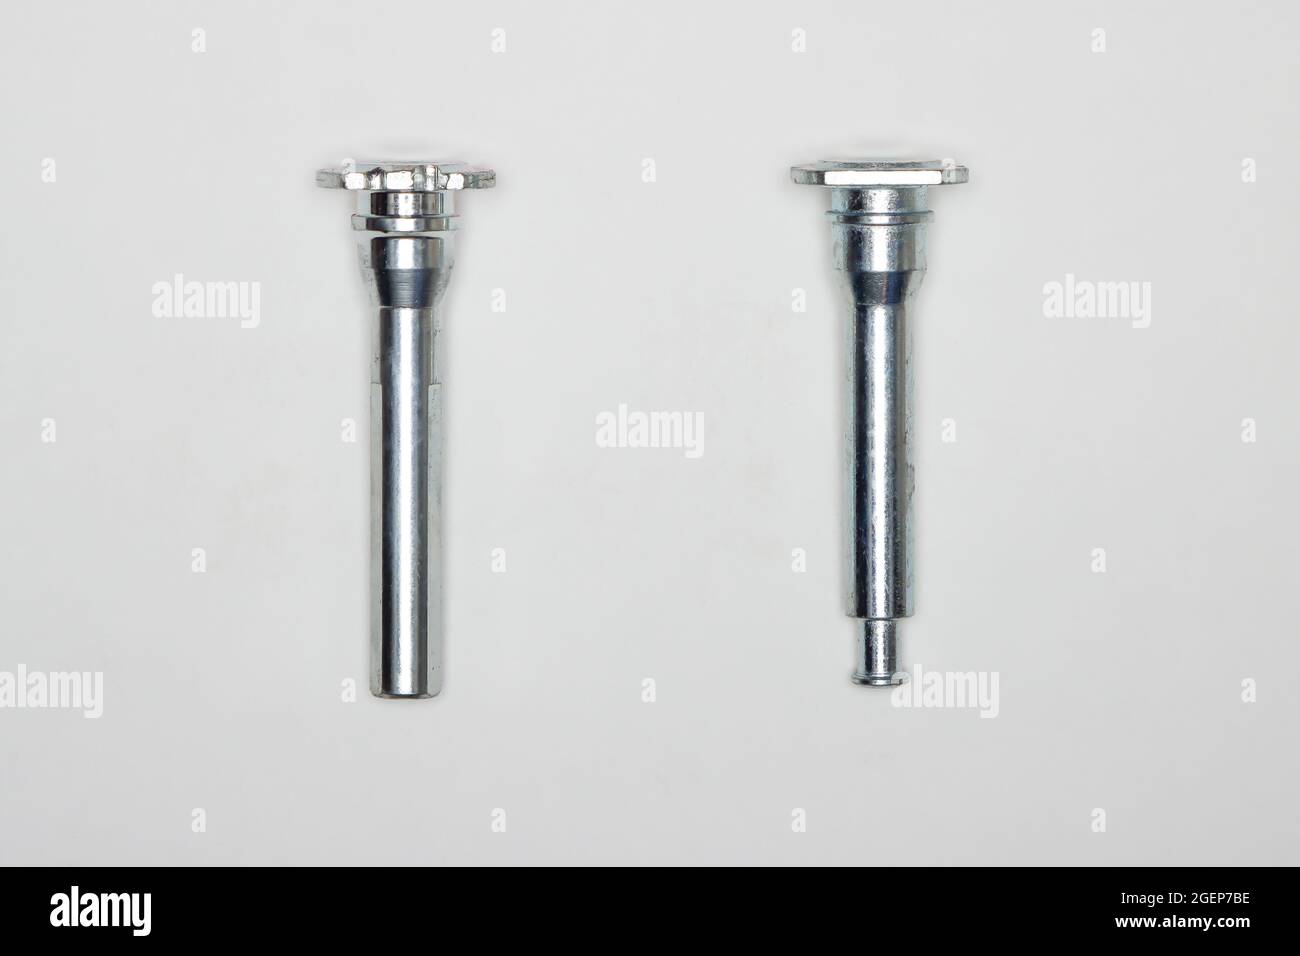 Two metal fingers, machine repair parts. A set of spare parts for servicing the braking system of a vehicle. Details on white background, copy space available. Stock Photo